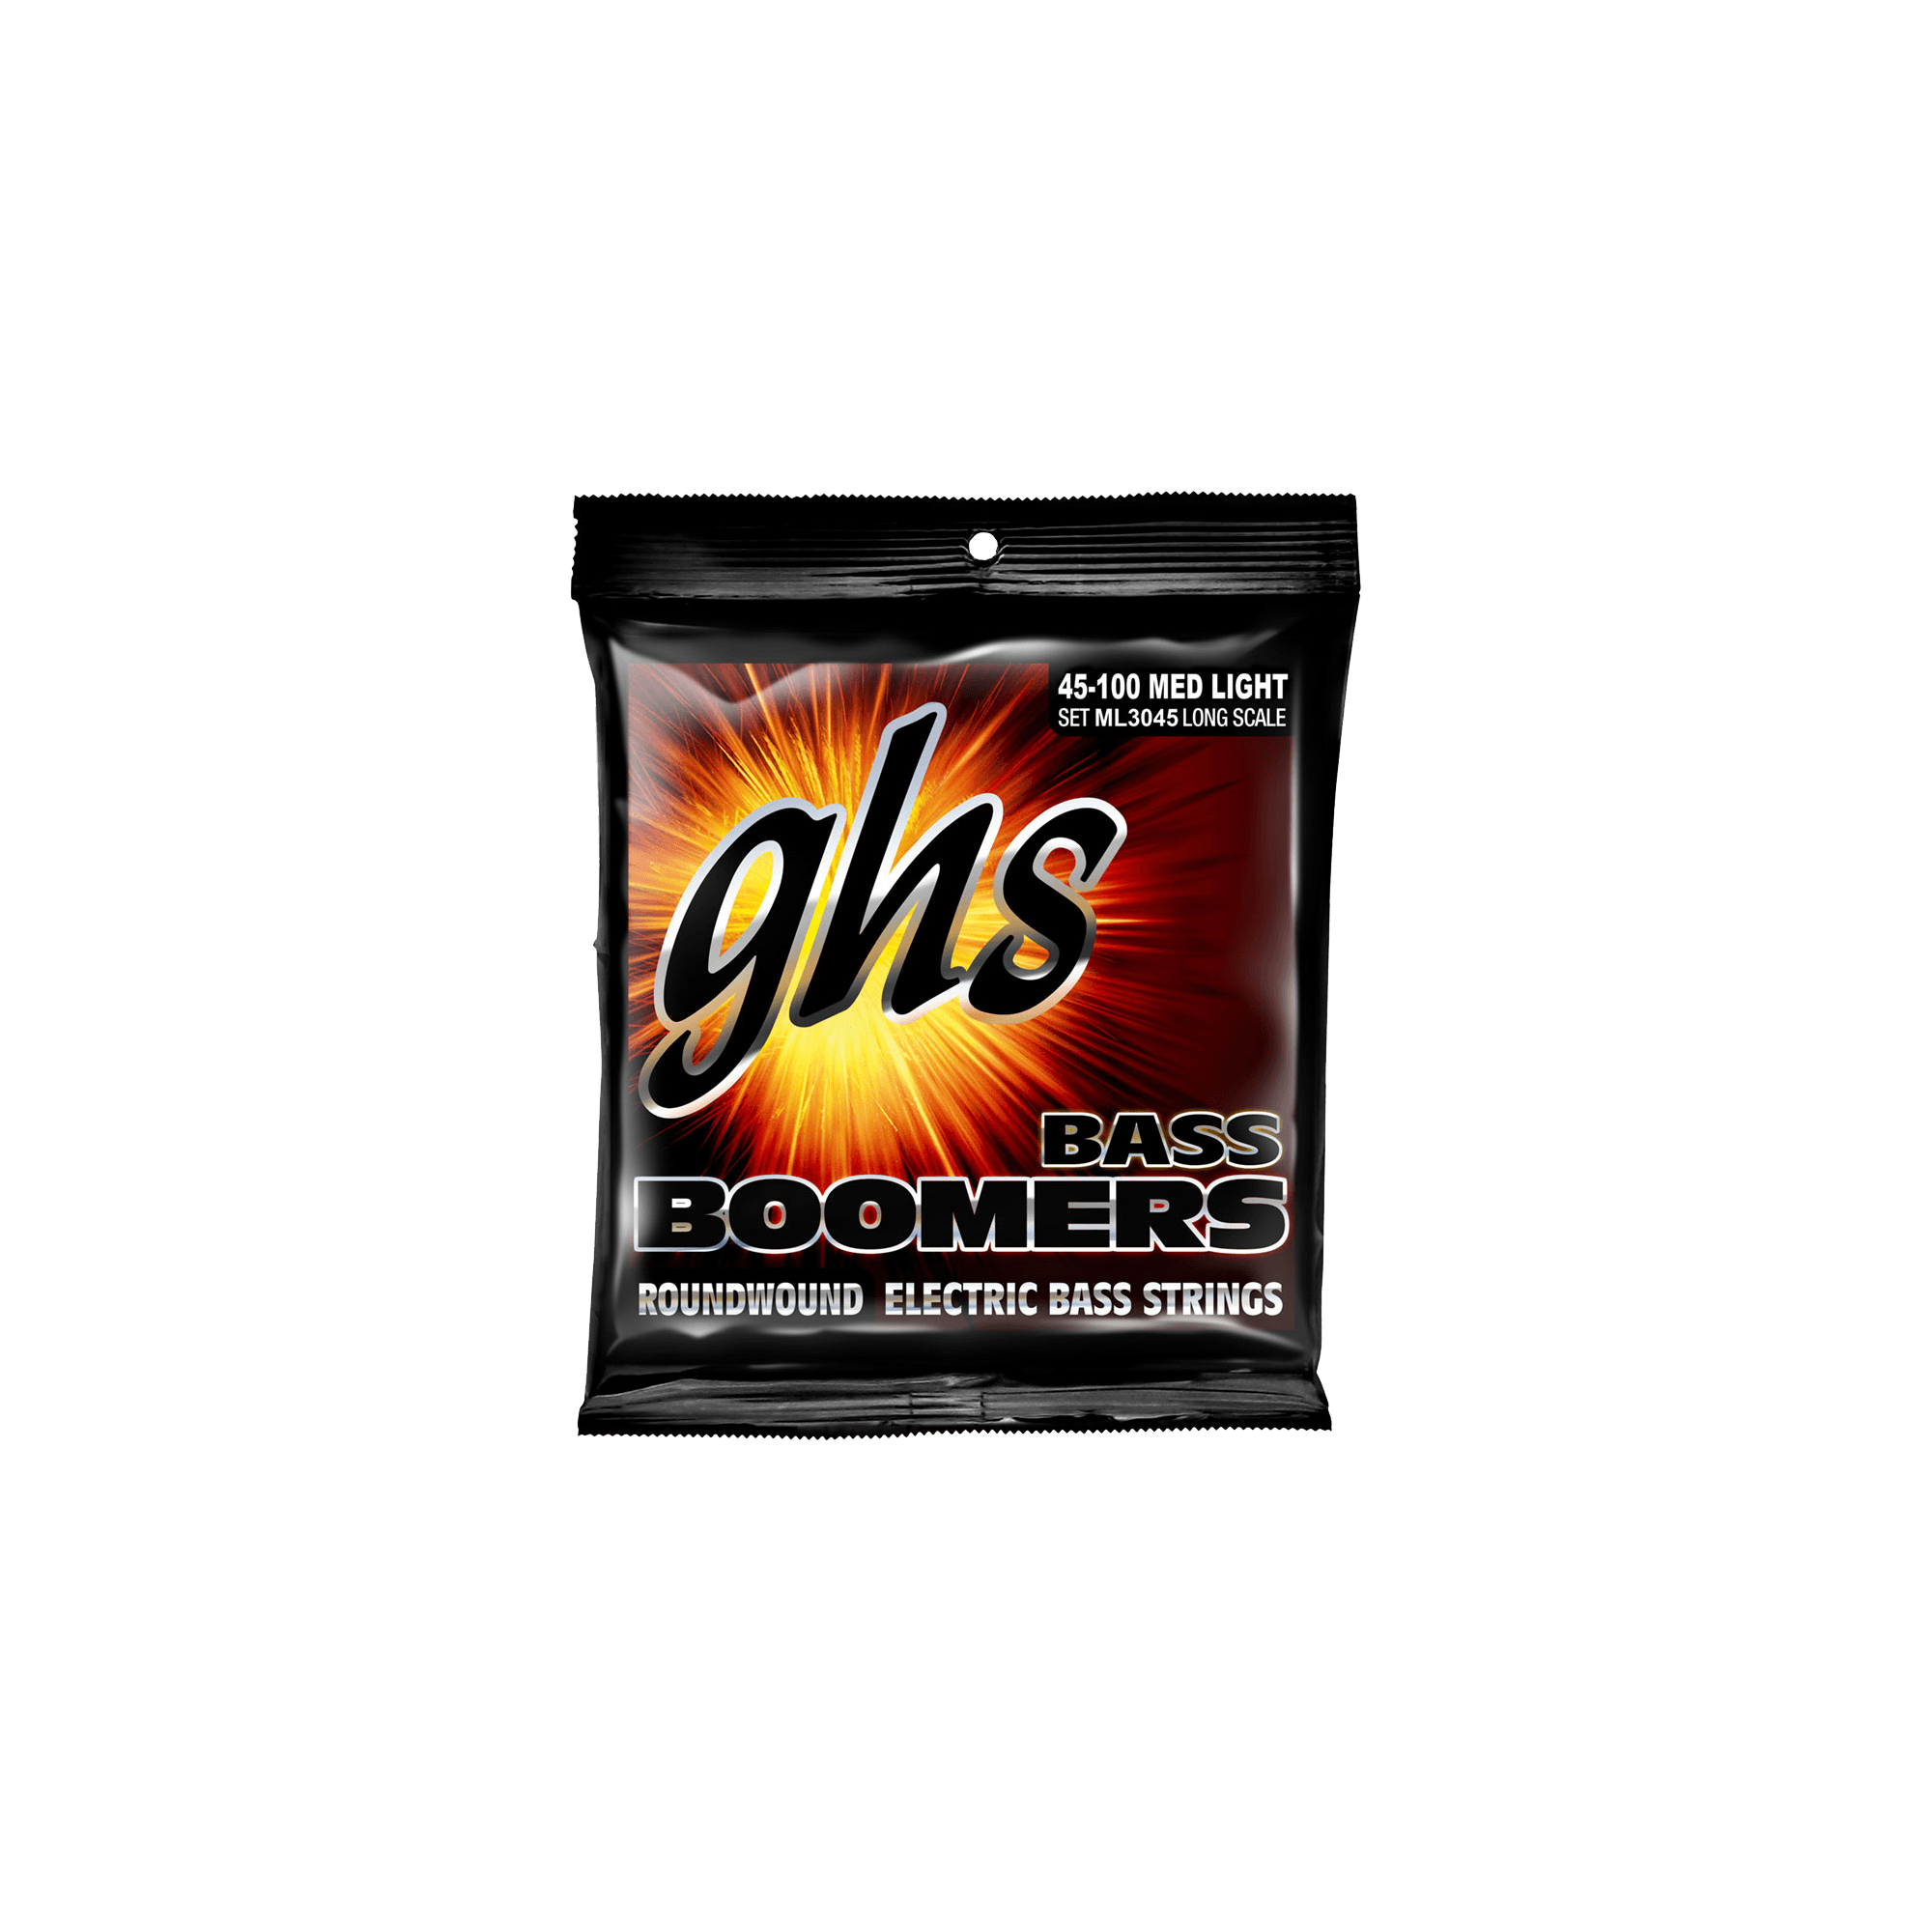 GHS BOOMERS 45/100